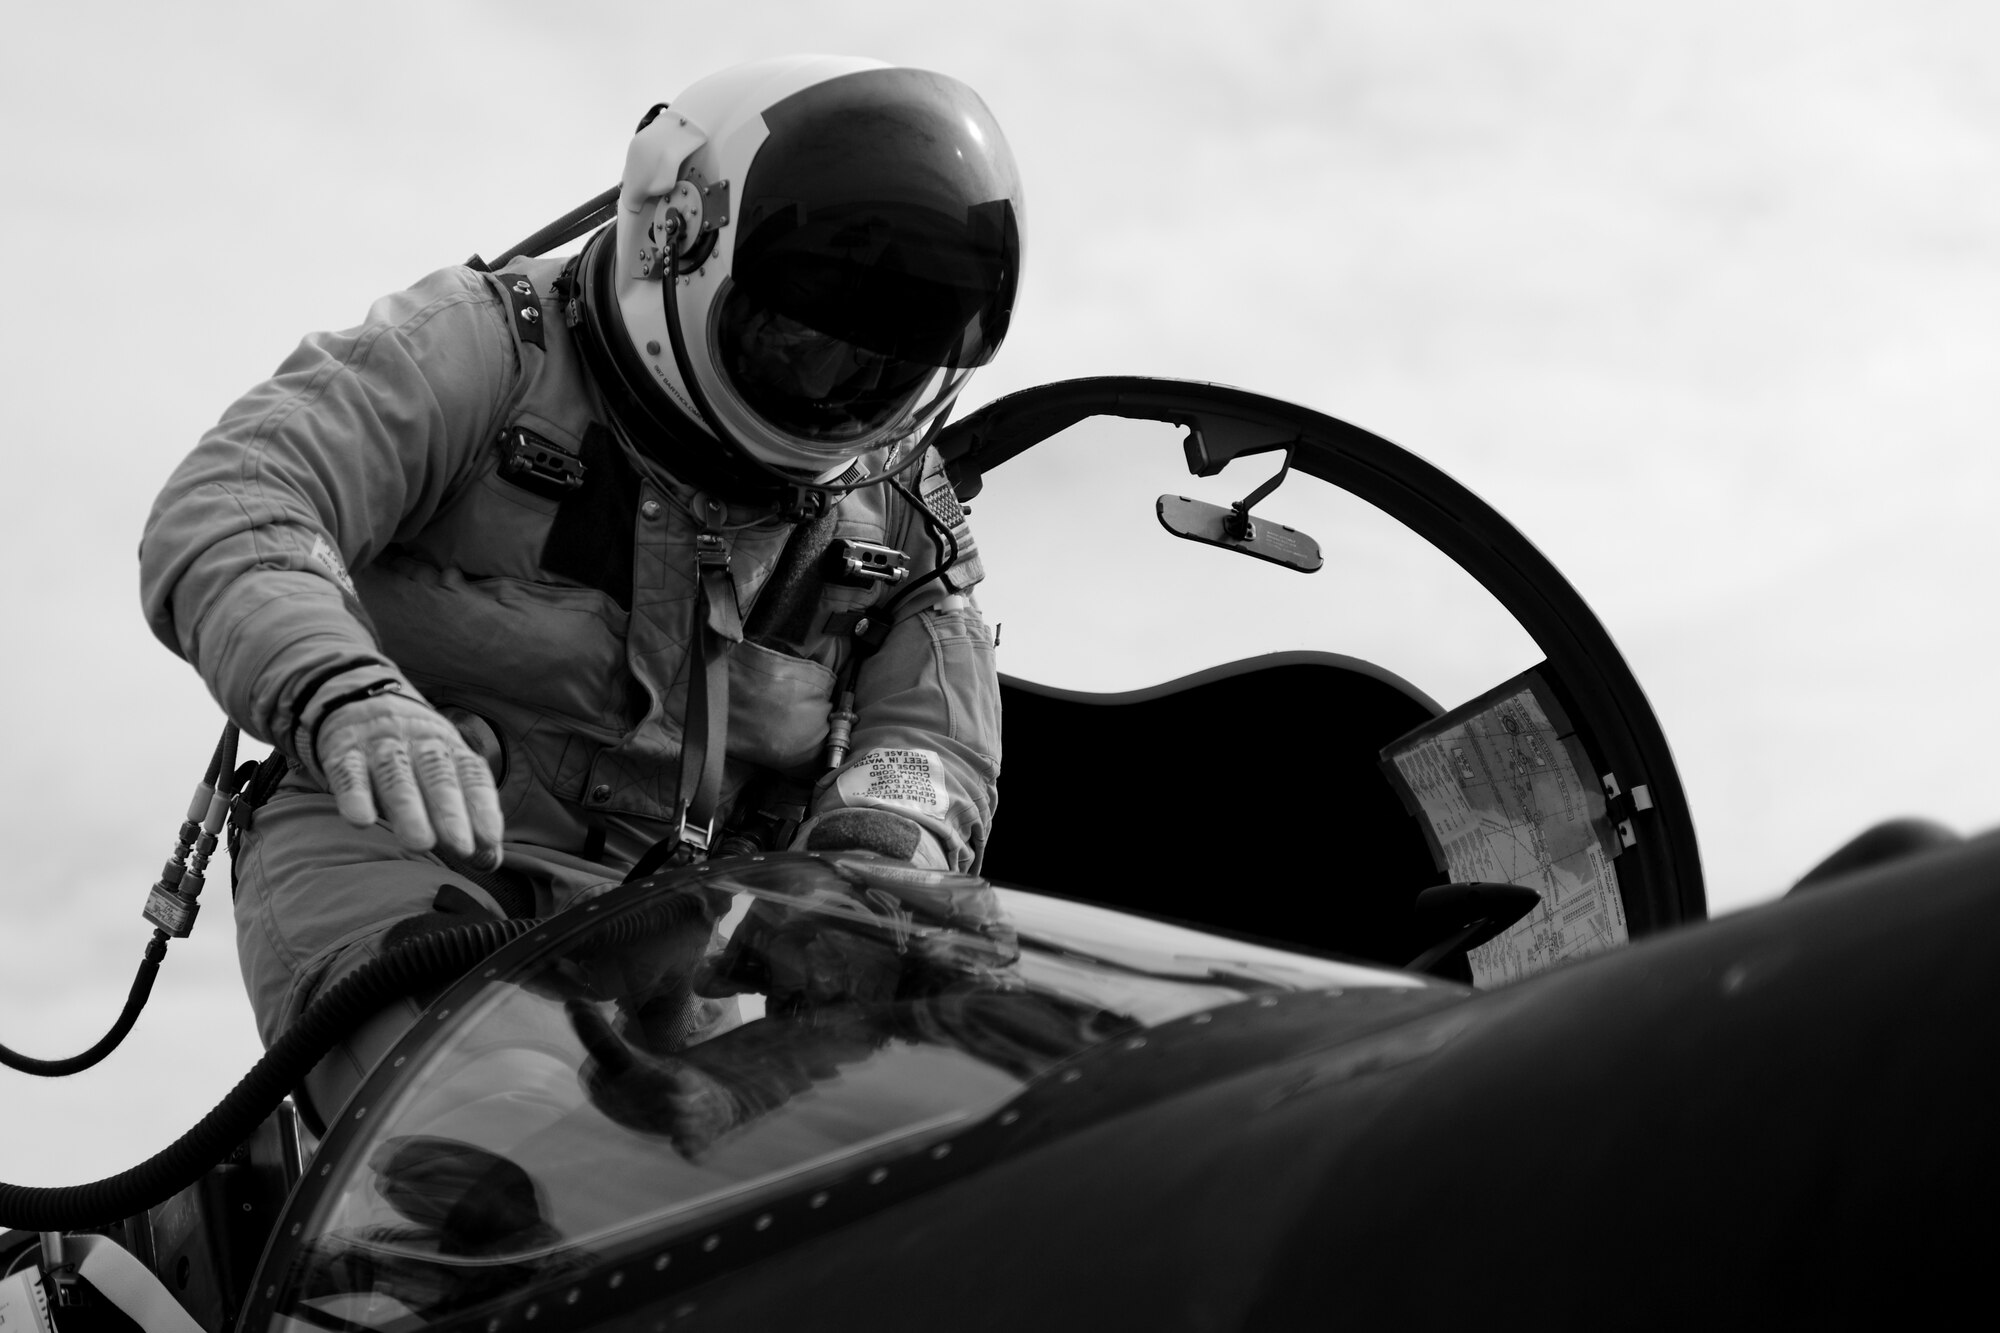 U.S. Air Force Maj. Cory Bartholomew, U-2 Dragon Lady pilot from the 9th Reconnaissance Wing, climbs into the cockpit of his aircraft before taking flight at RAF Fairford, United Kingdom, June 6, 2014. Bartholomew, who is set to retire October 2014, has been piloting the Dragon Lady for more than 20 years. (U.S. Air Force photo by Staff Sgt. Jarad A. Denton/Released)